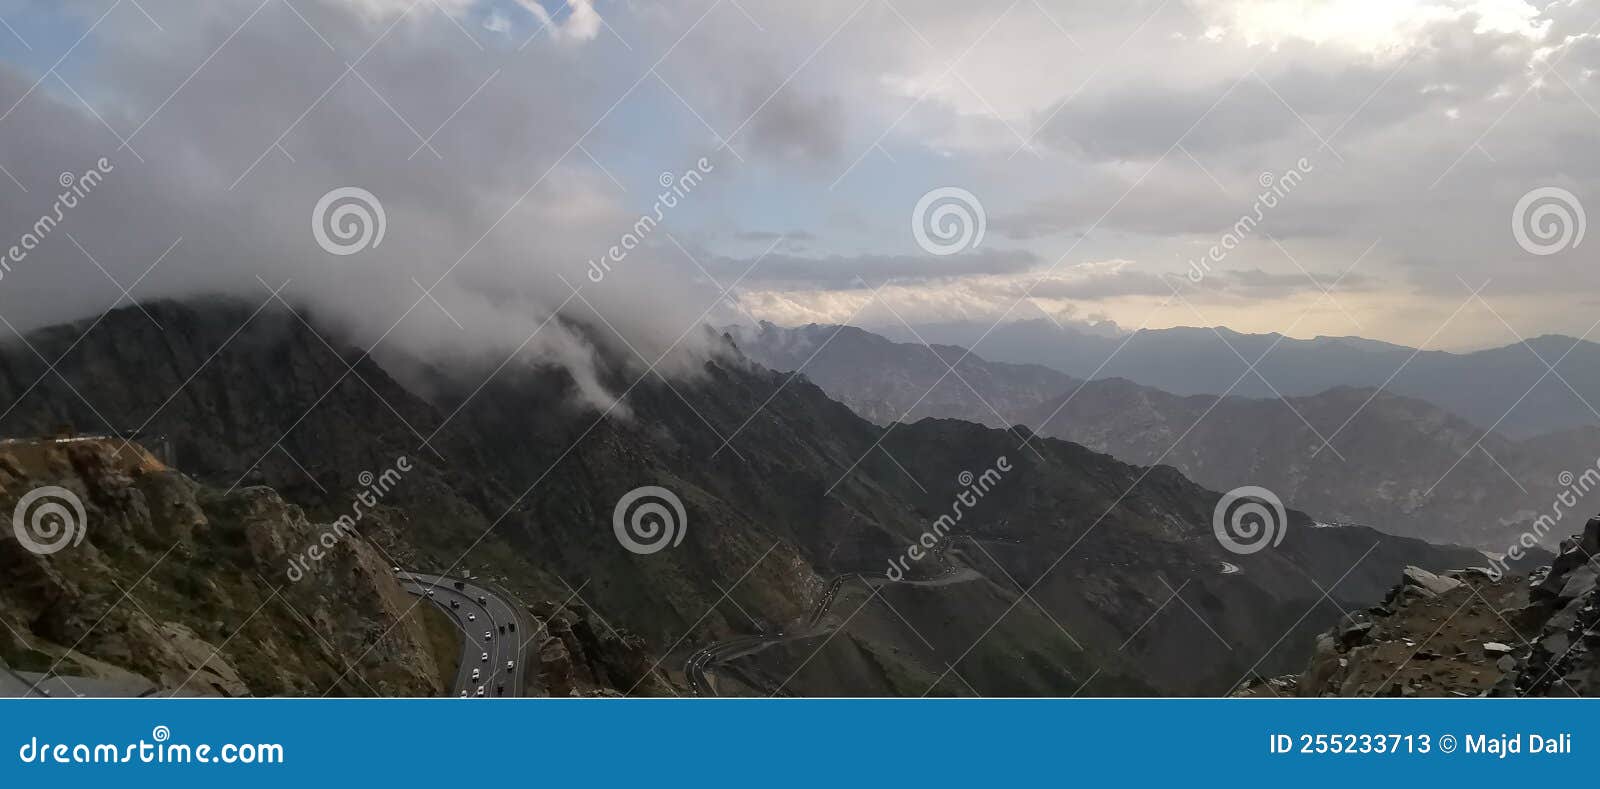 great view of hada mountains